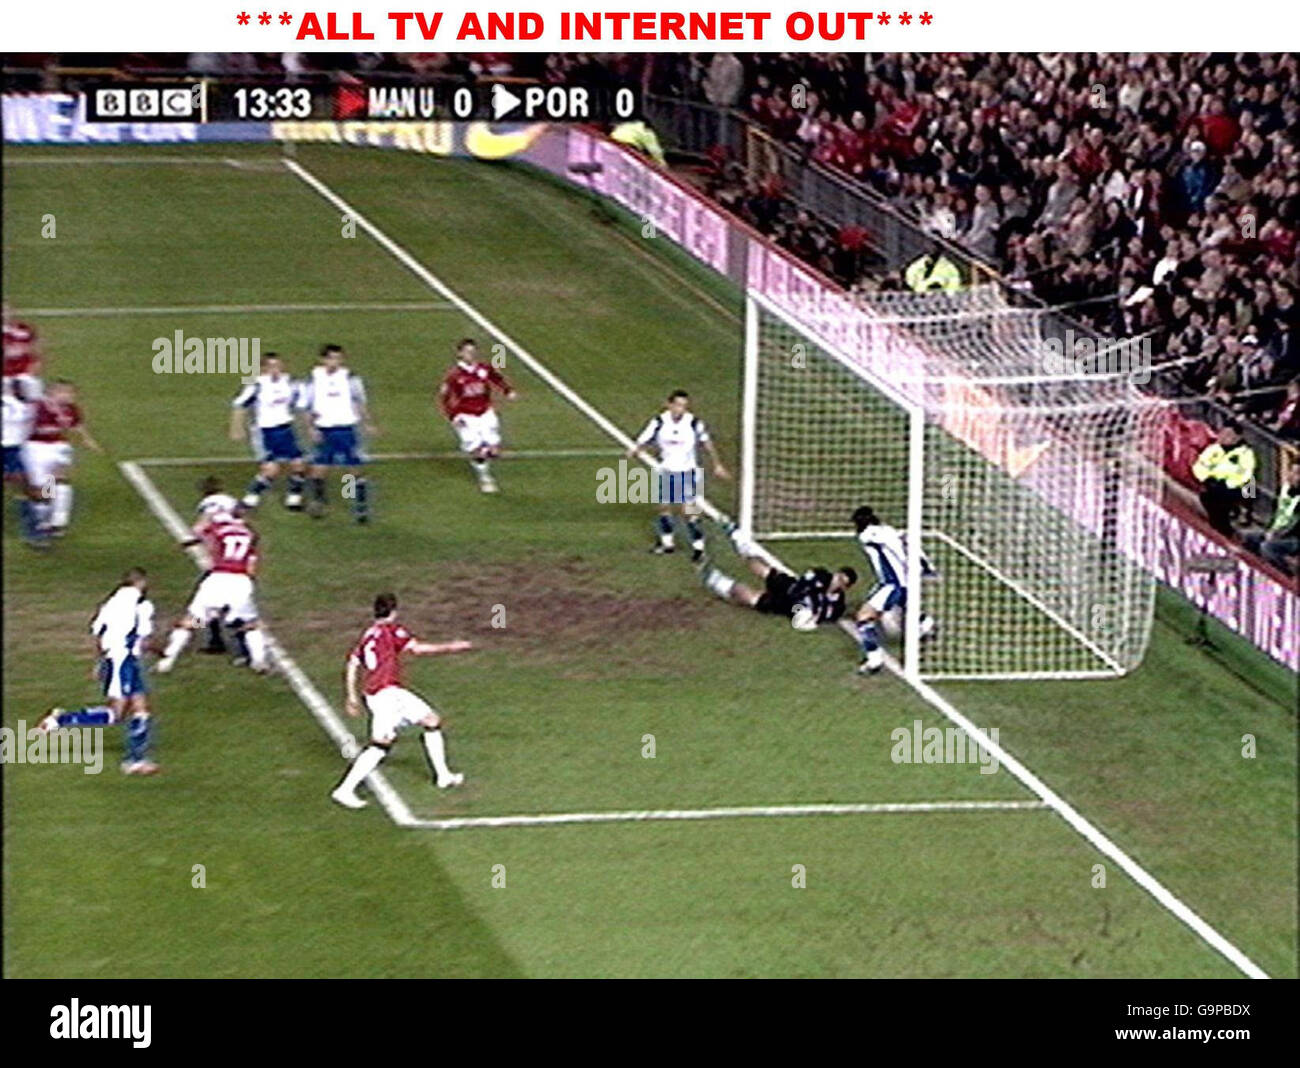 We are advised that video-grabs should not be used by daily papers later than 48 hours after the broadcast of the programme, without consent of the copyright holder. ALL TV AND INTERNET OUT. Video grab from the BBC showing the ball crossing the line following a header from Manchester United's Nemanja Vidic during the FA Cup fourth round match against Portsmouth at Old Trafford, Manchester. Stock Photo